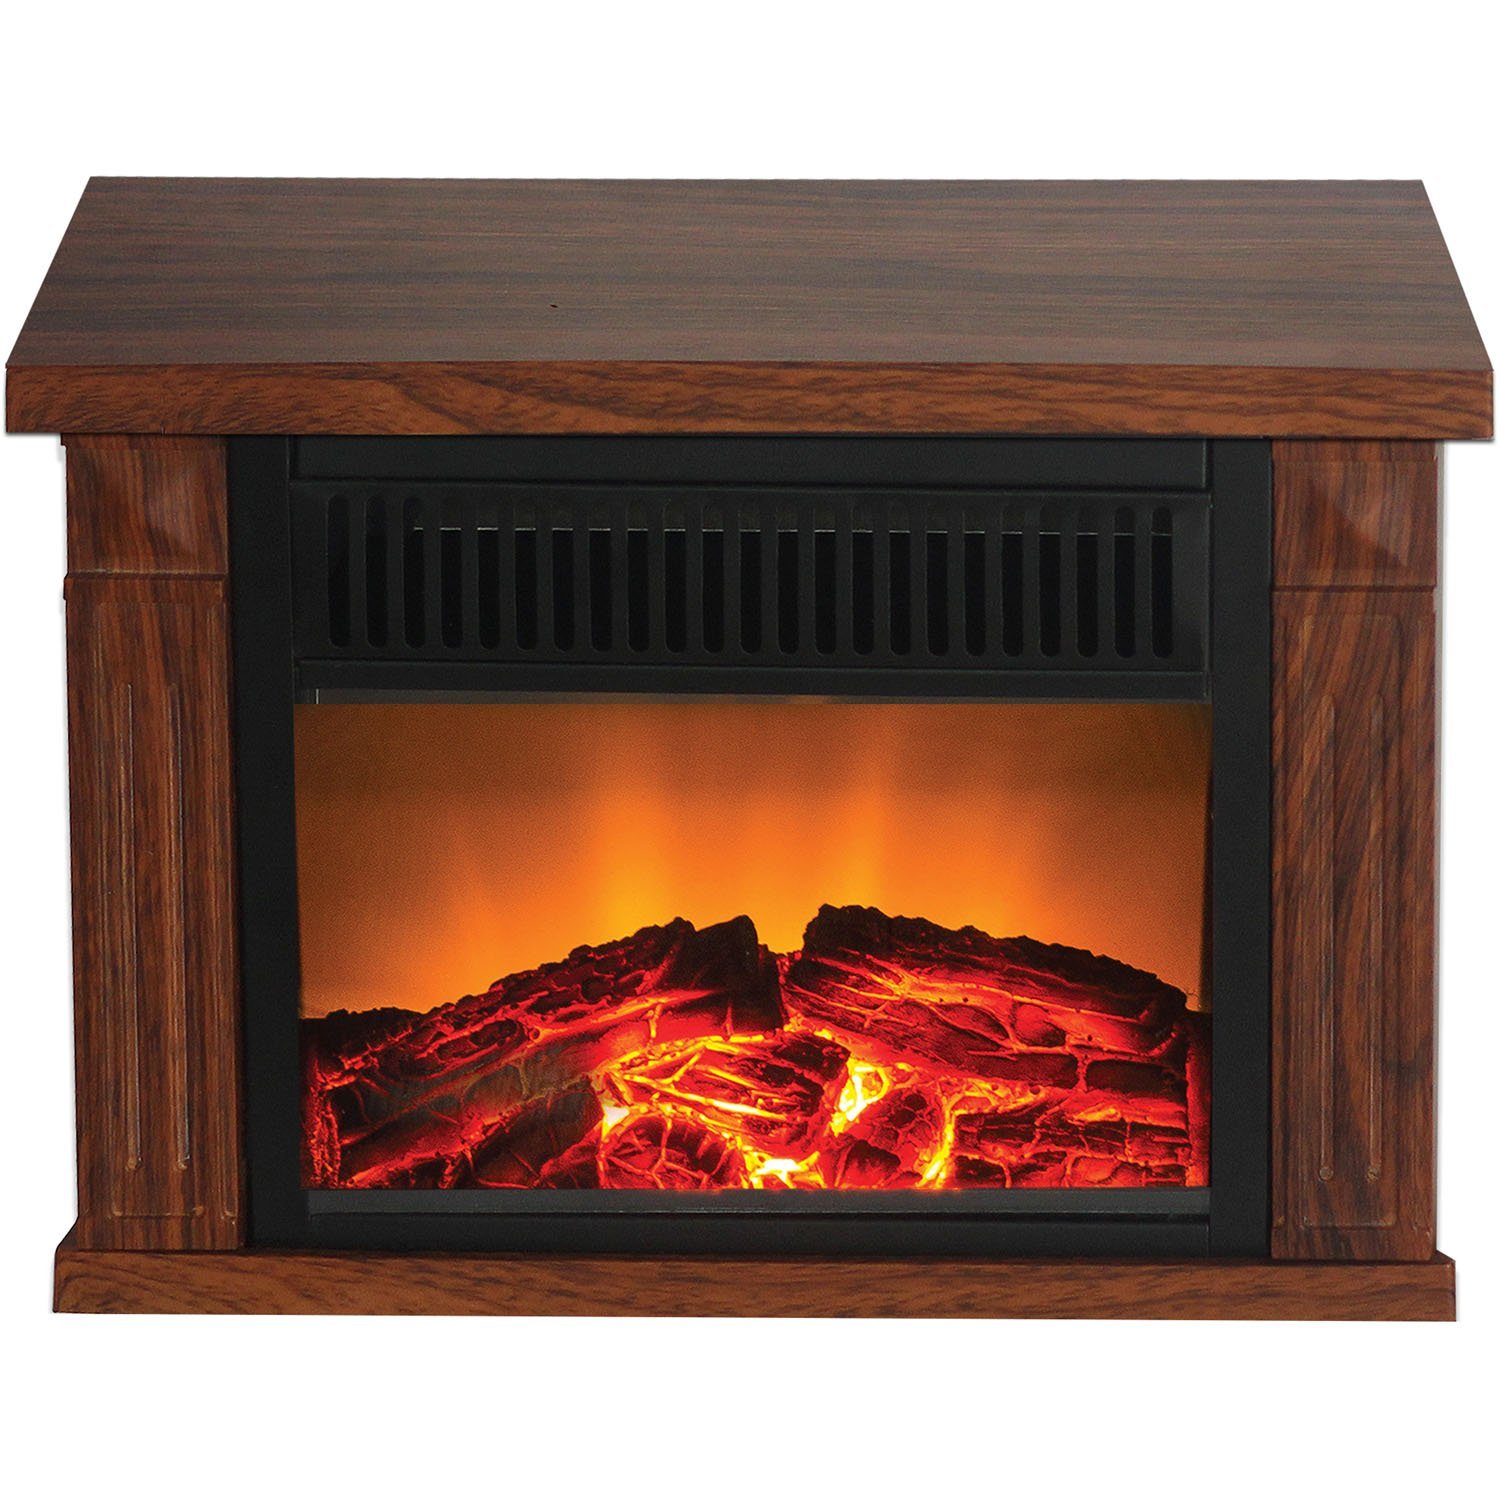 Frigidaire TZRF 10344  Zurich   Compact Retro Fireplace, Tabletop Design, 2 setting 500/1000w   Wood